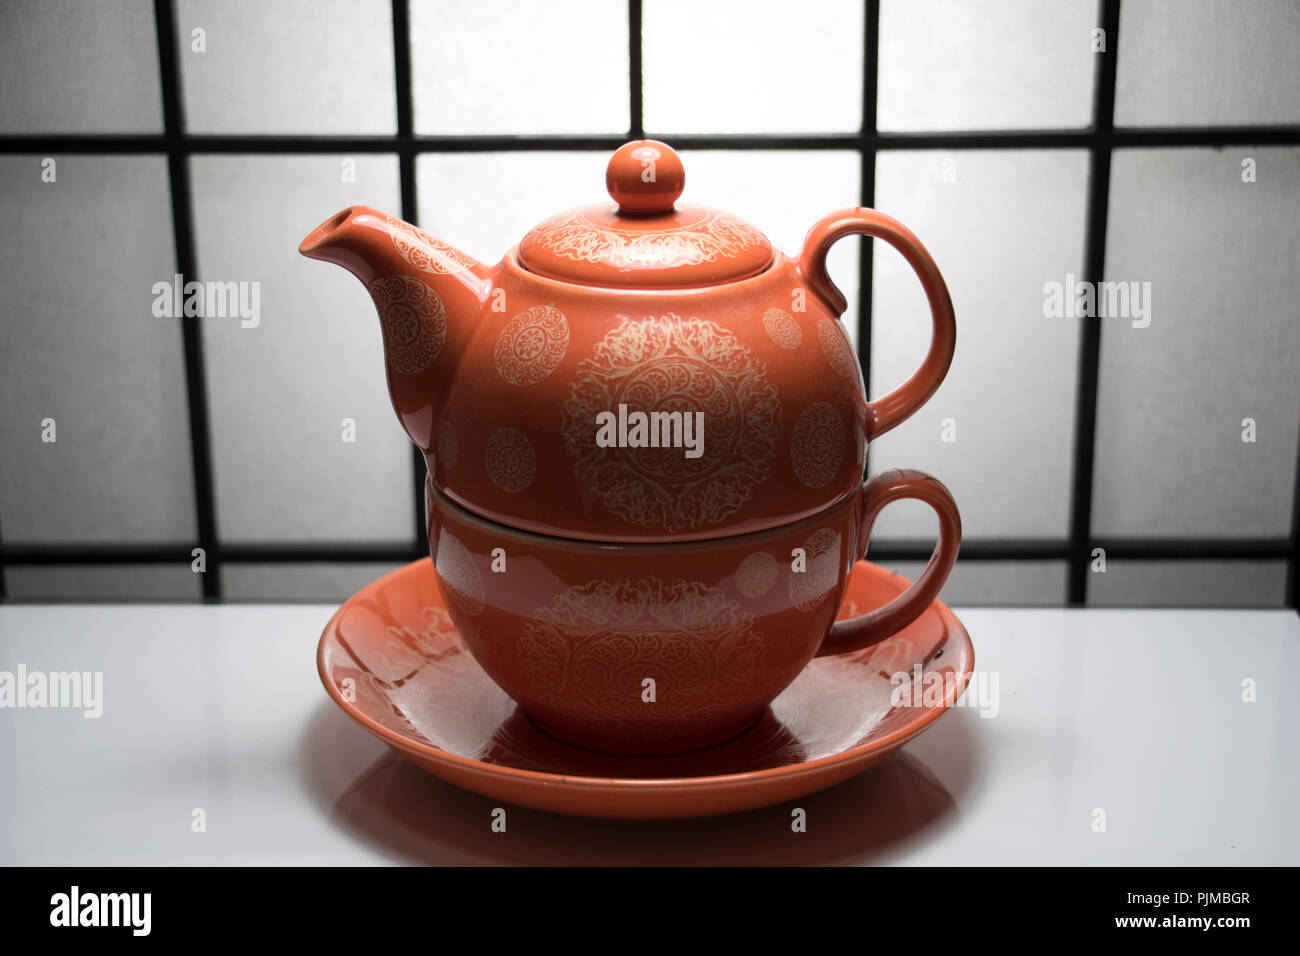 Japanese tea cup and kettle on a white shiny table with Asian paper dividing wall in the background. Stock Photo